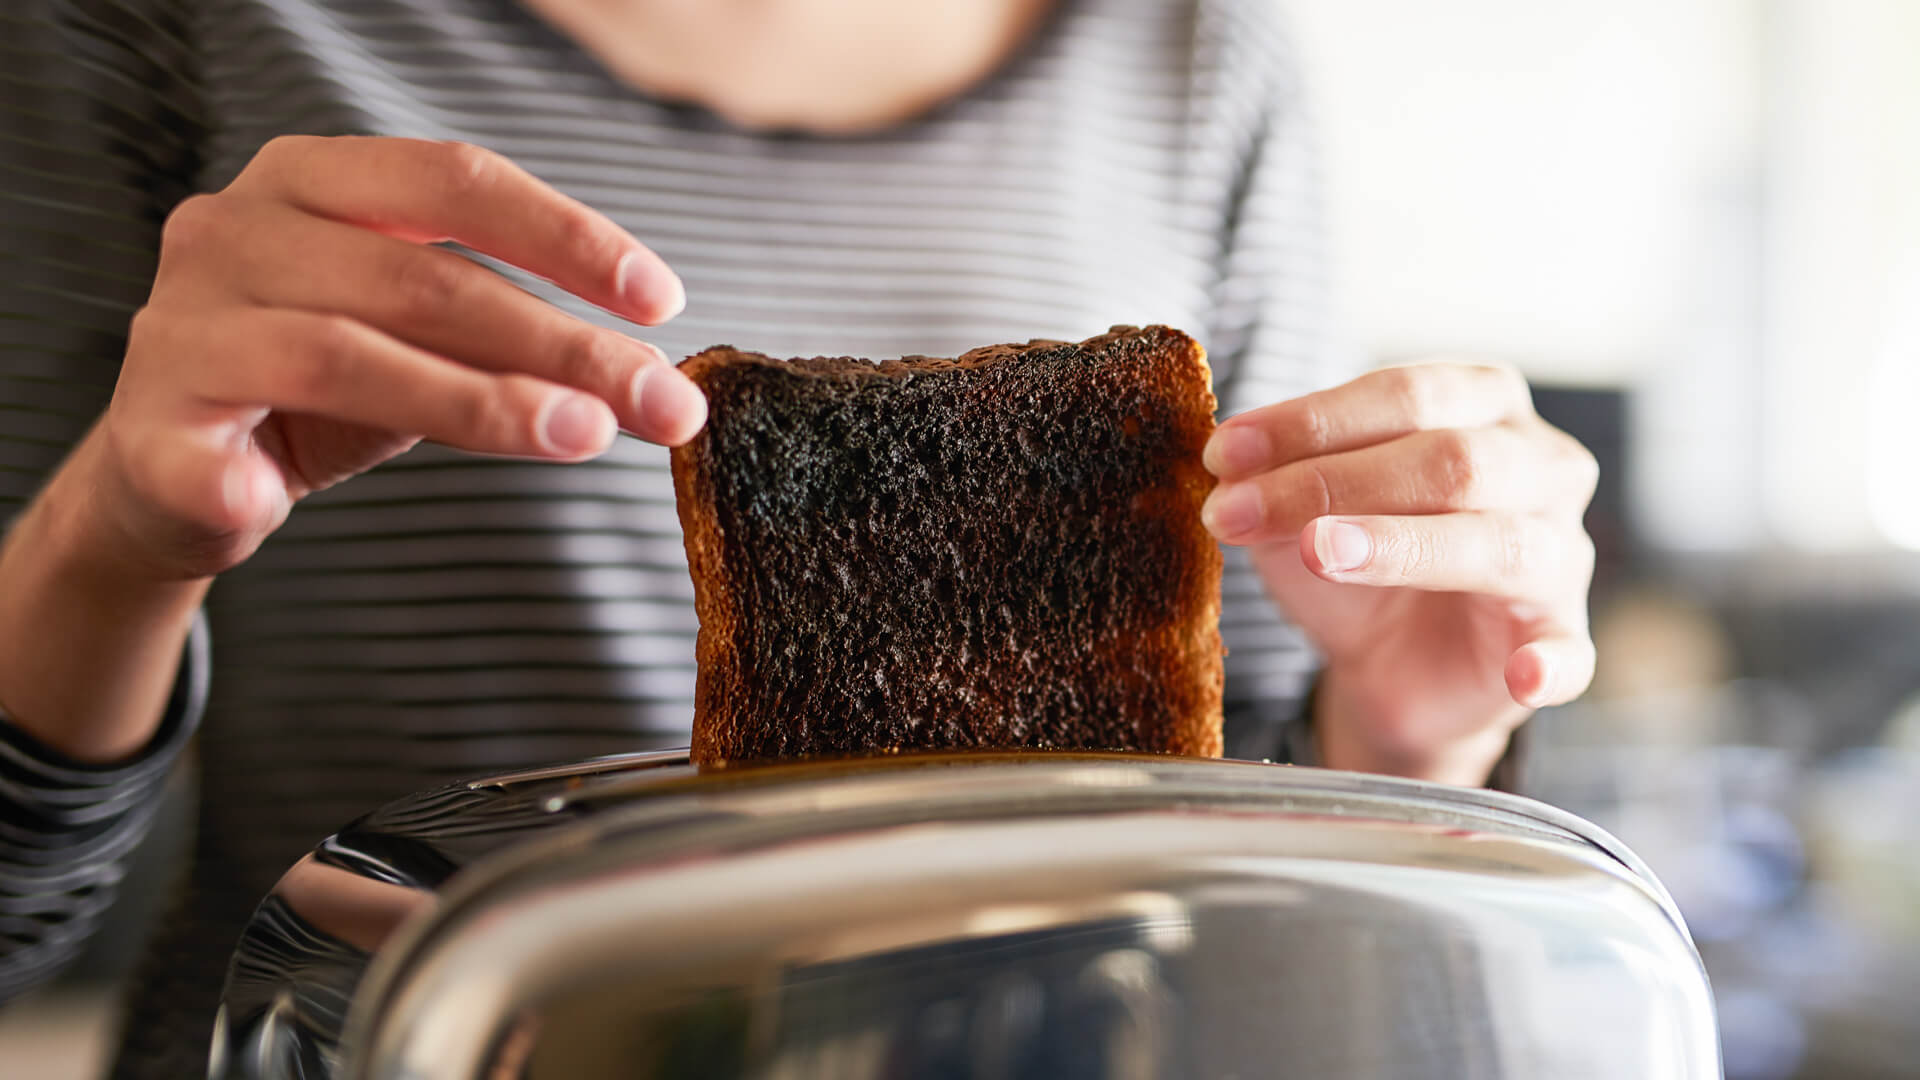 https://cdn.gobankingrates.com/wp-content/uploads/2019/11/pulling-out-burnt-toast-from-toaster-iStock-884367842.jpg